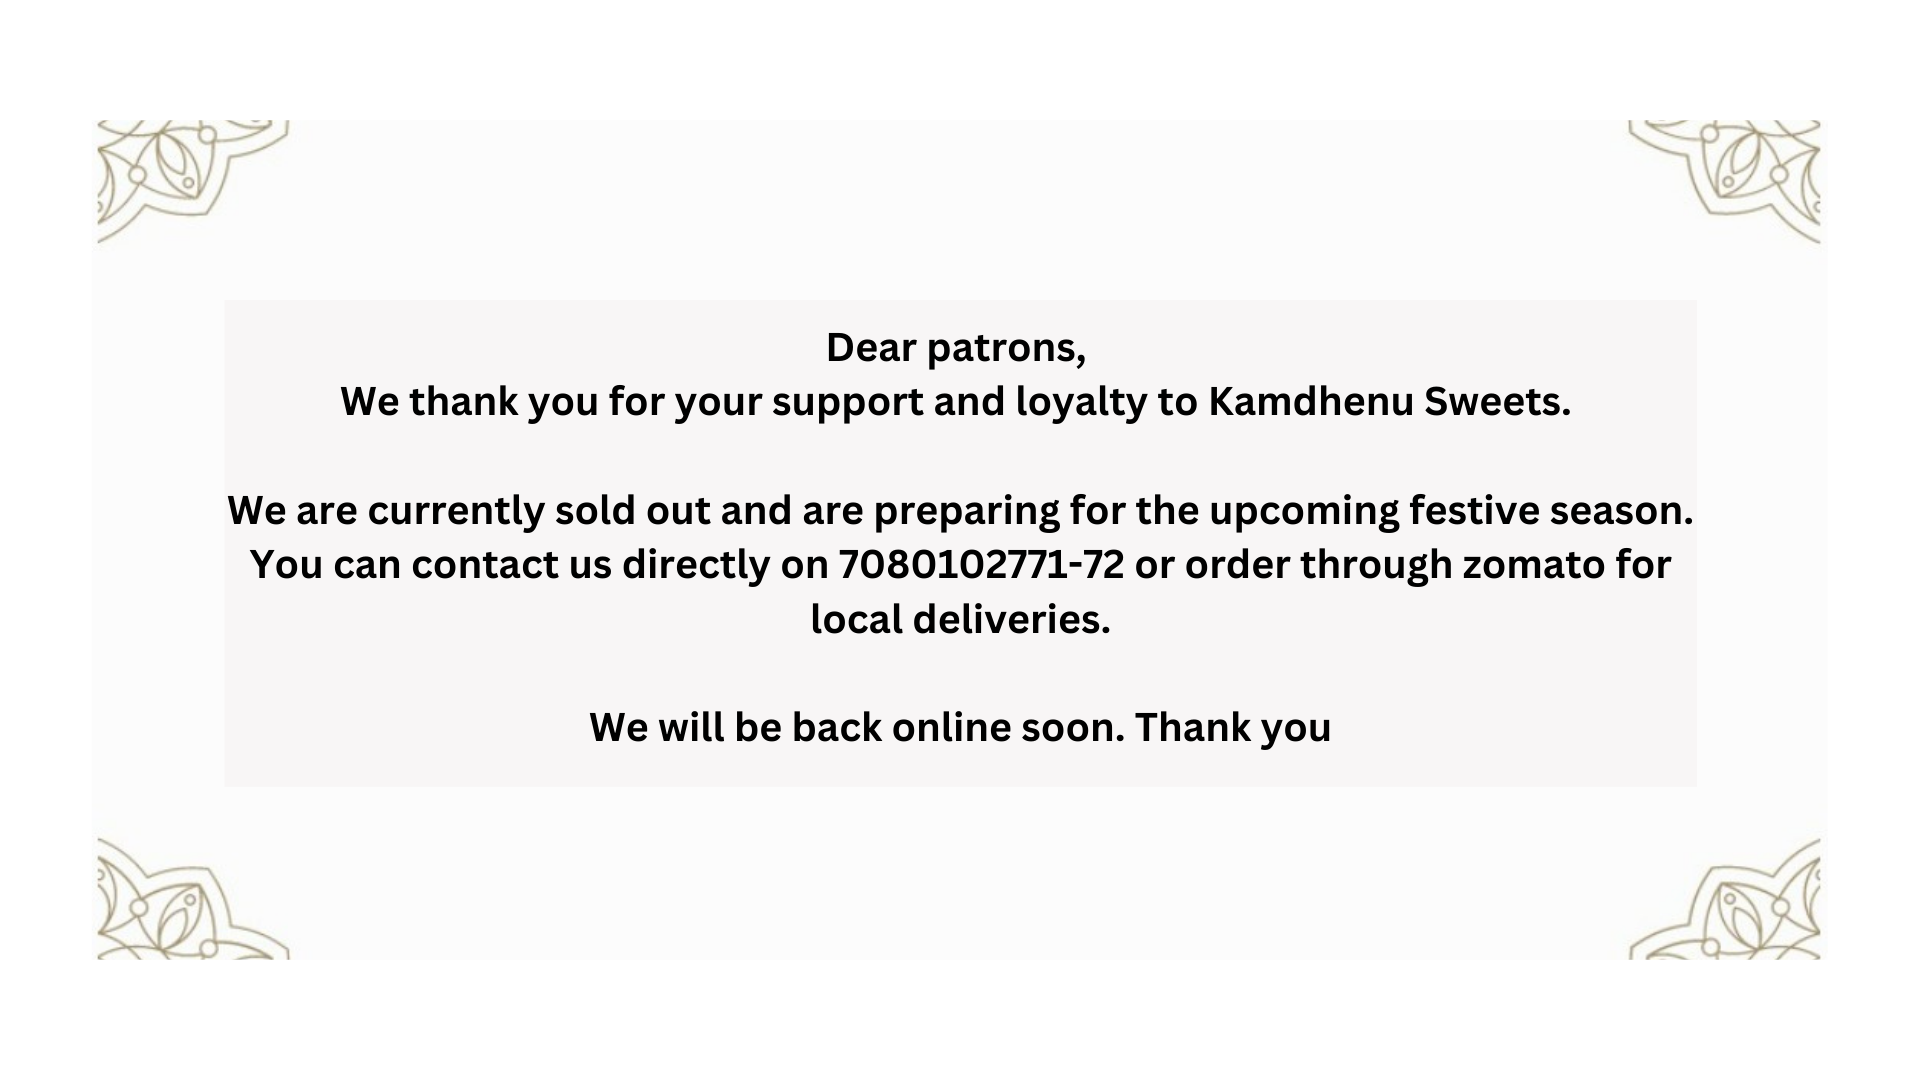 Dear patrons, We thankyou for your support and loyalty to Kamdhenu Sweets. We are currently sold out and are preparing for the upcoming festive season. You can contact d